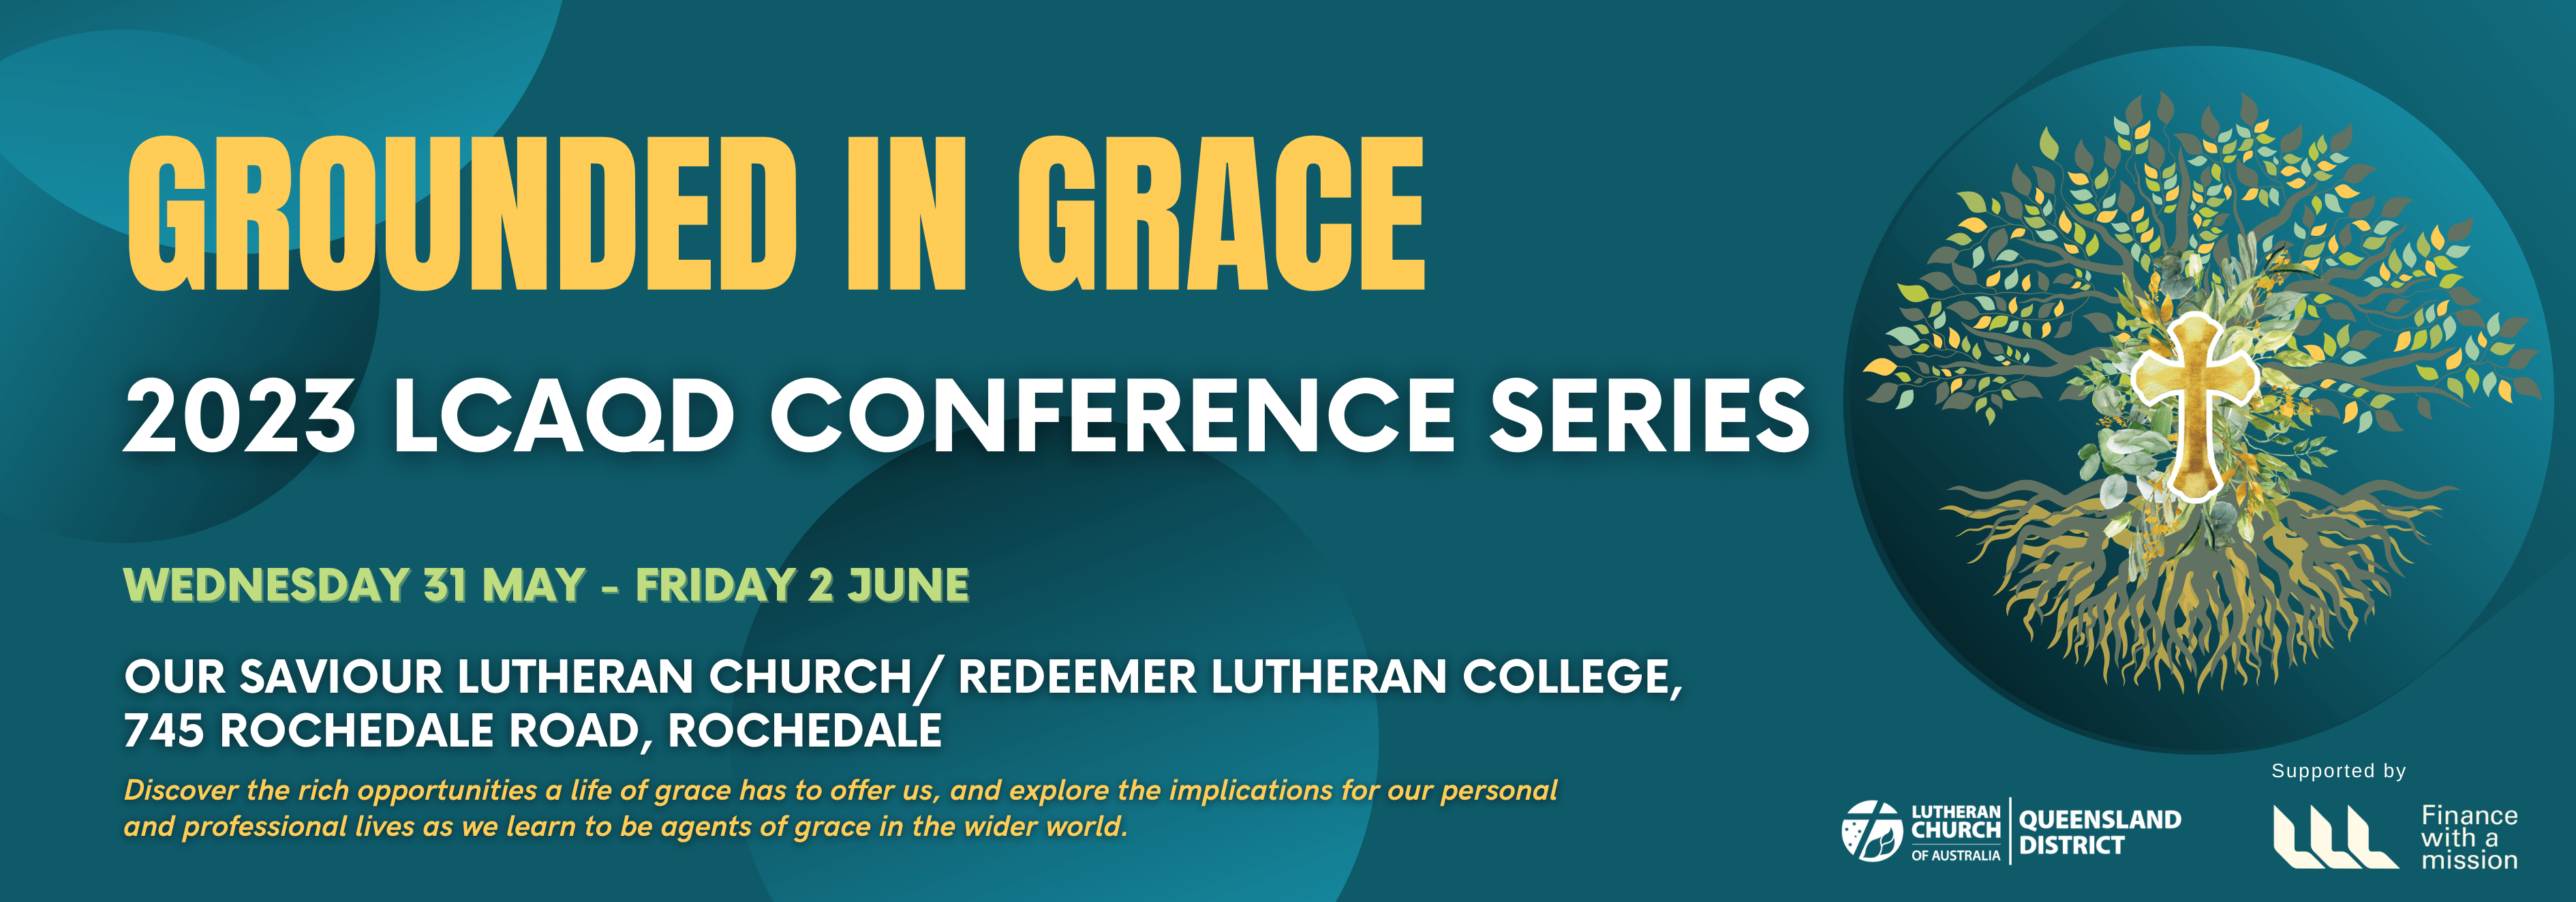 Grounded in Grace Conference Web Banner (2)